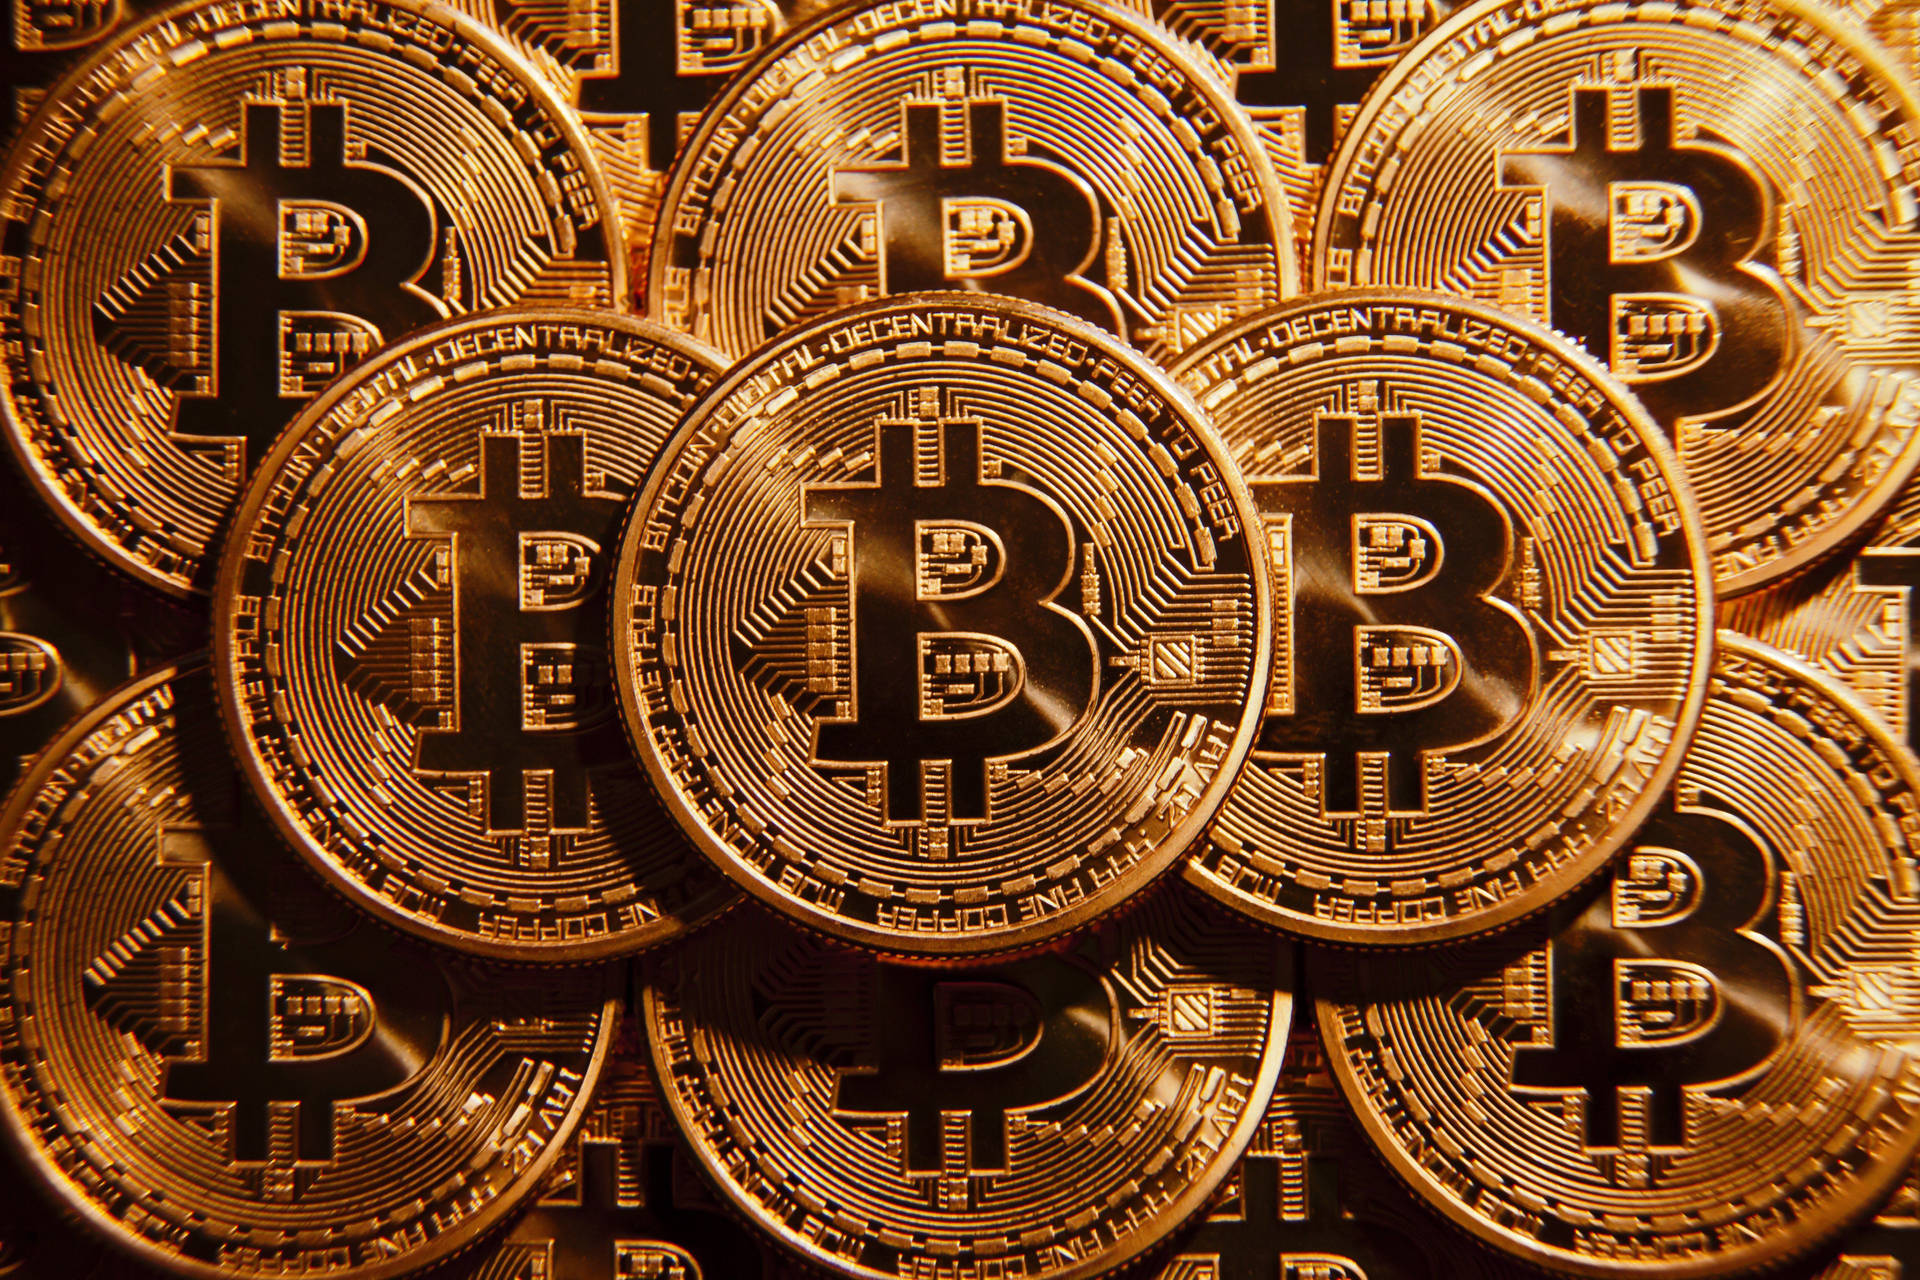 Bitcoin hits a record high. Here are 4 things to know about this spectacular rally - OPB